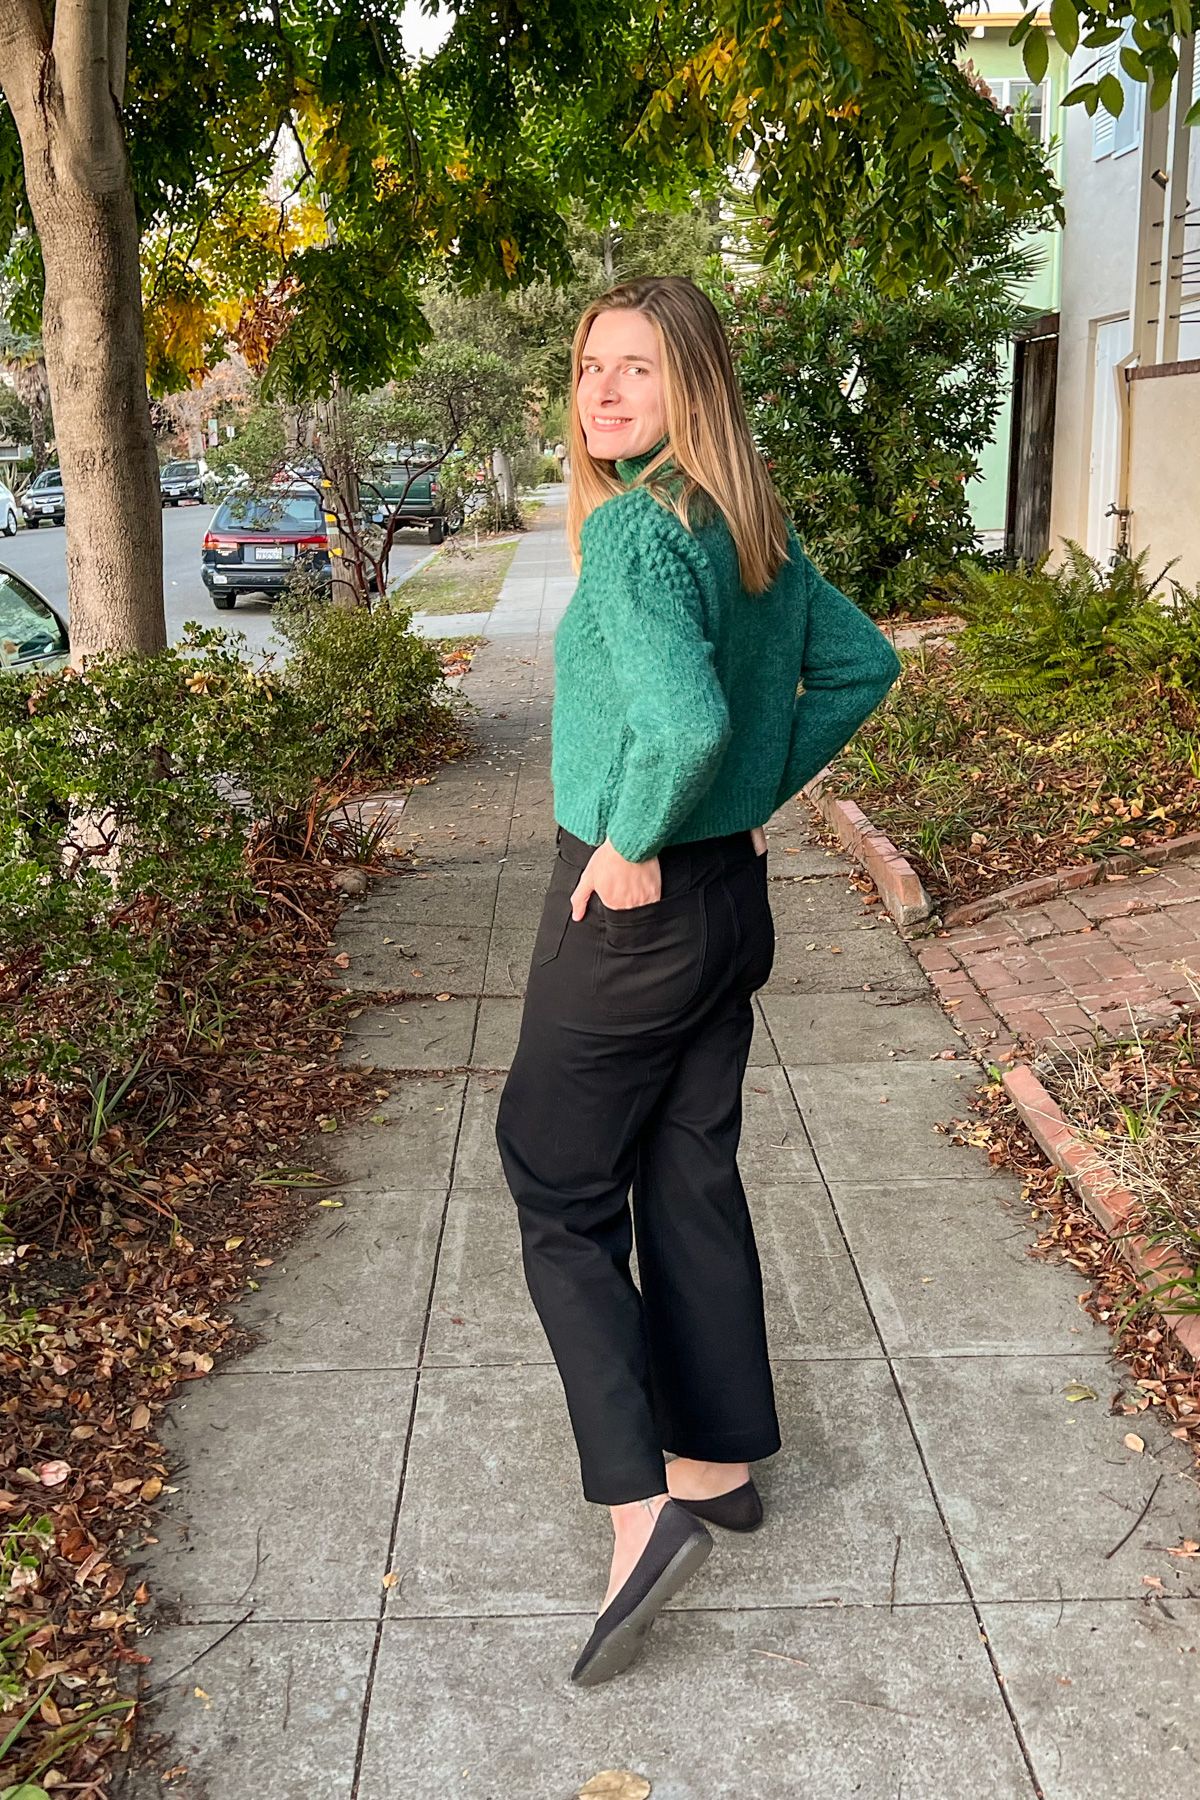 A young, light-haired woman wears a green sweater and black pants and poses with her hands in her back pockets, smiling over her shoulder on a residential sidewalk, with yellow autumn leaves surrounding her.